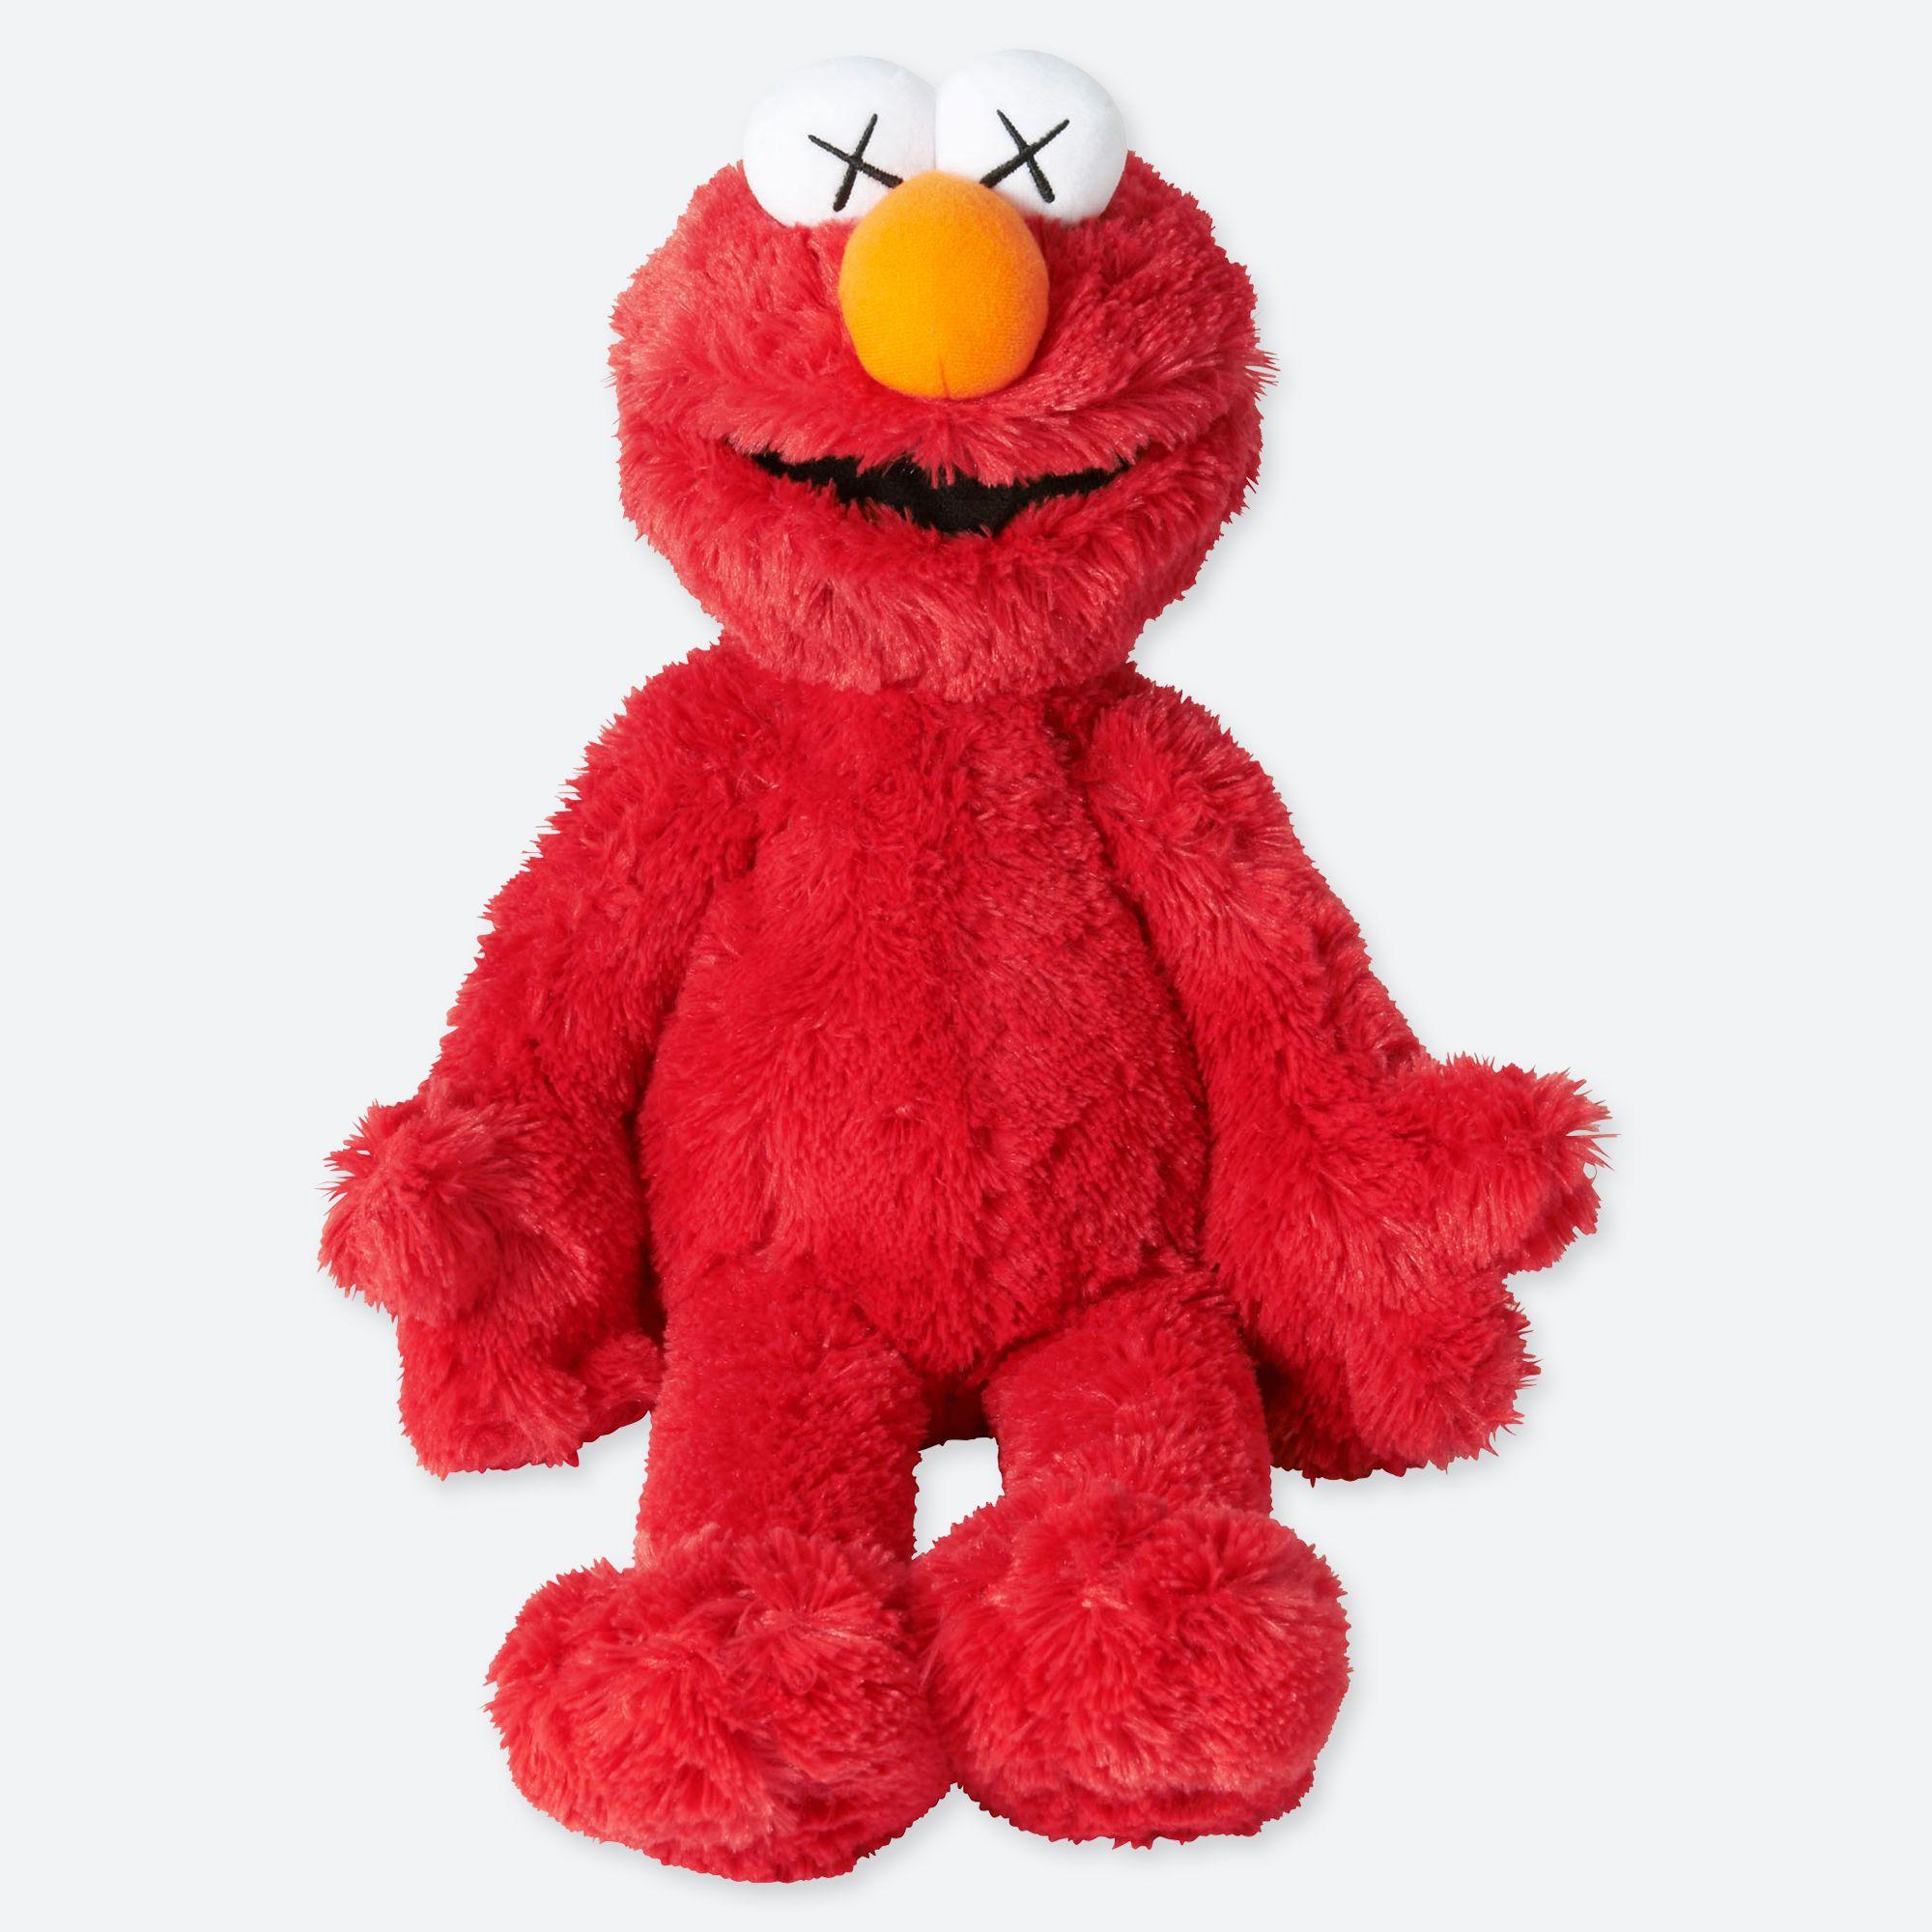 KAWS Sesame Street: Complete Set of 5 plush figures:
KAWS’ timeless interpretation of the 5 most popular Sesame Street characters – Elmo, Bert, Earnie, Cookie Monster and Big Bird, designed by KAWS with his signature “XX” eyes. 

New with tags and